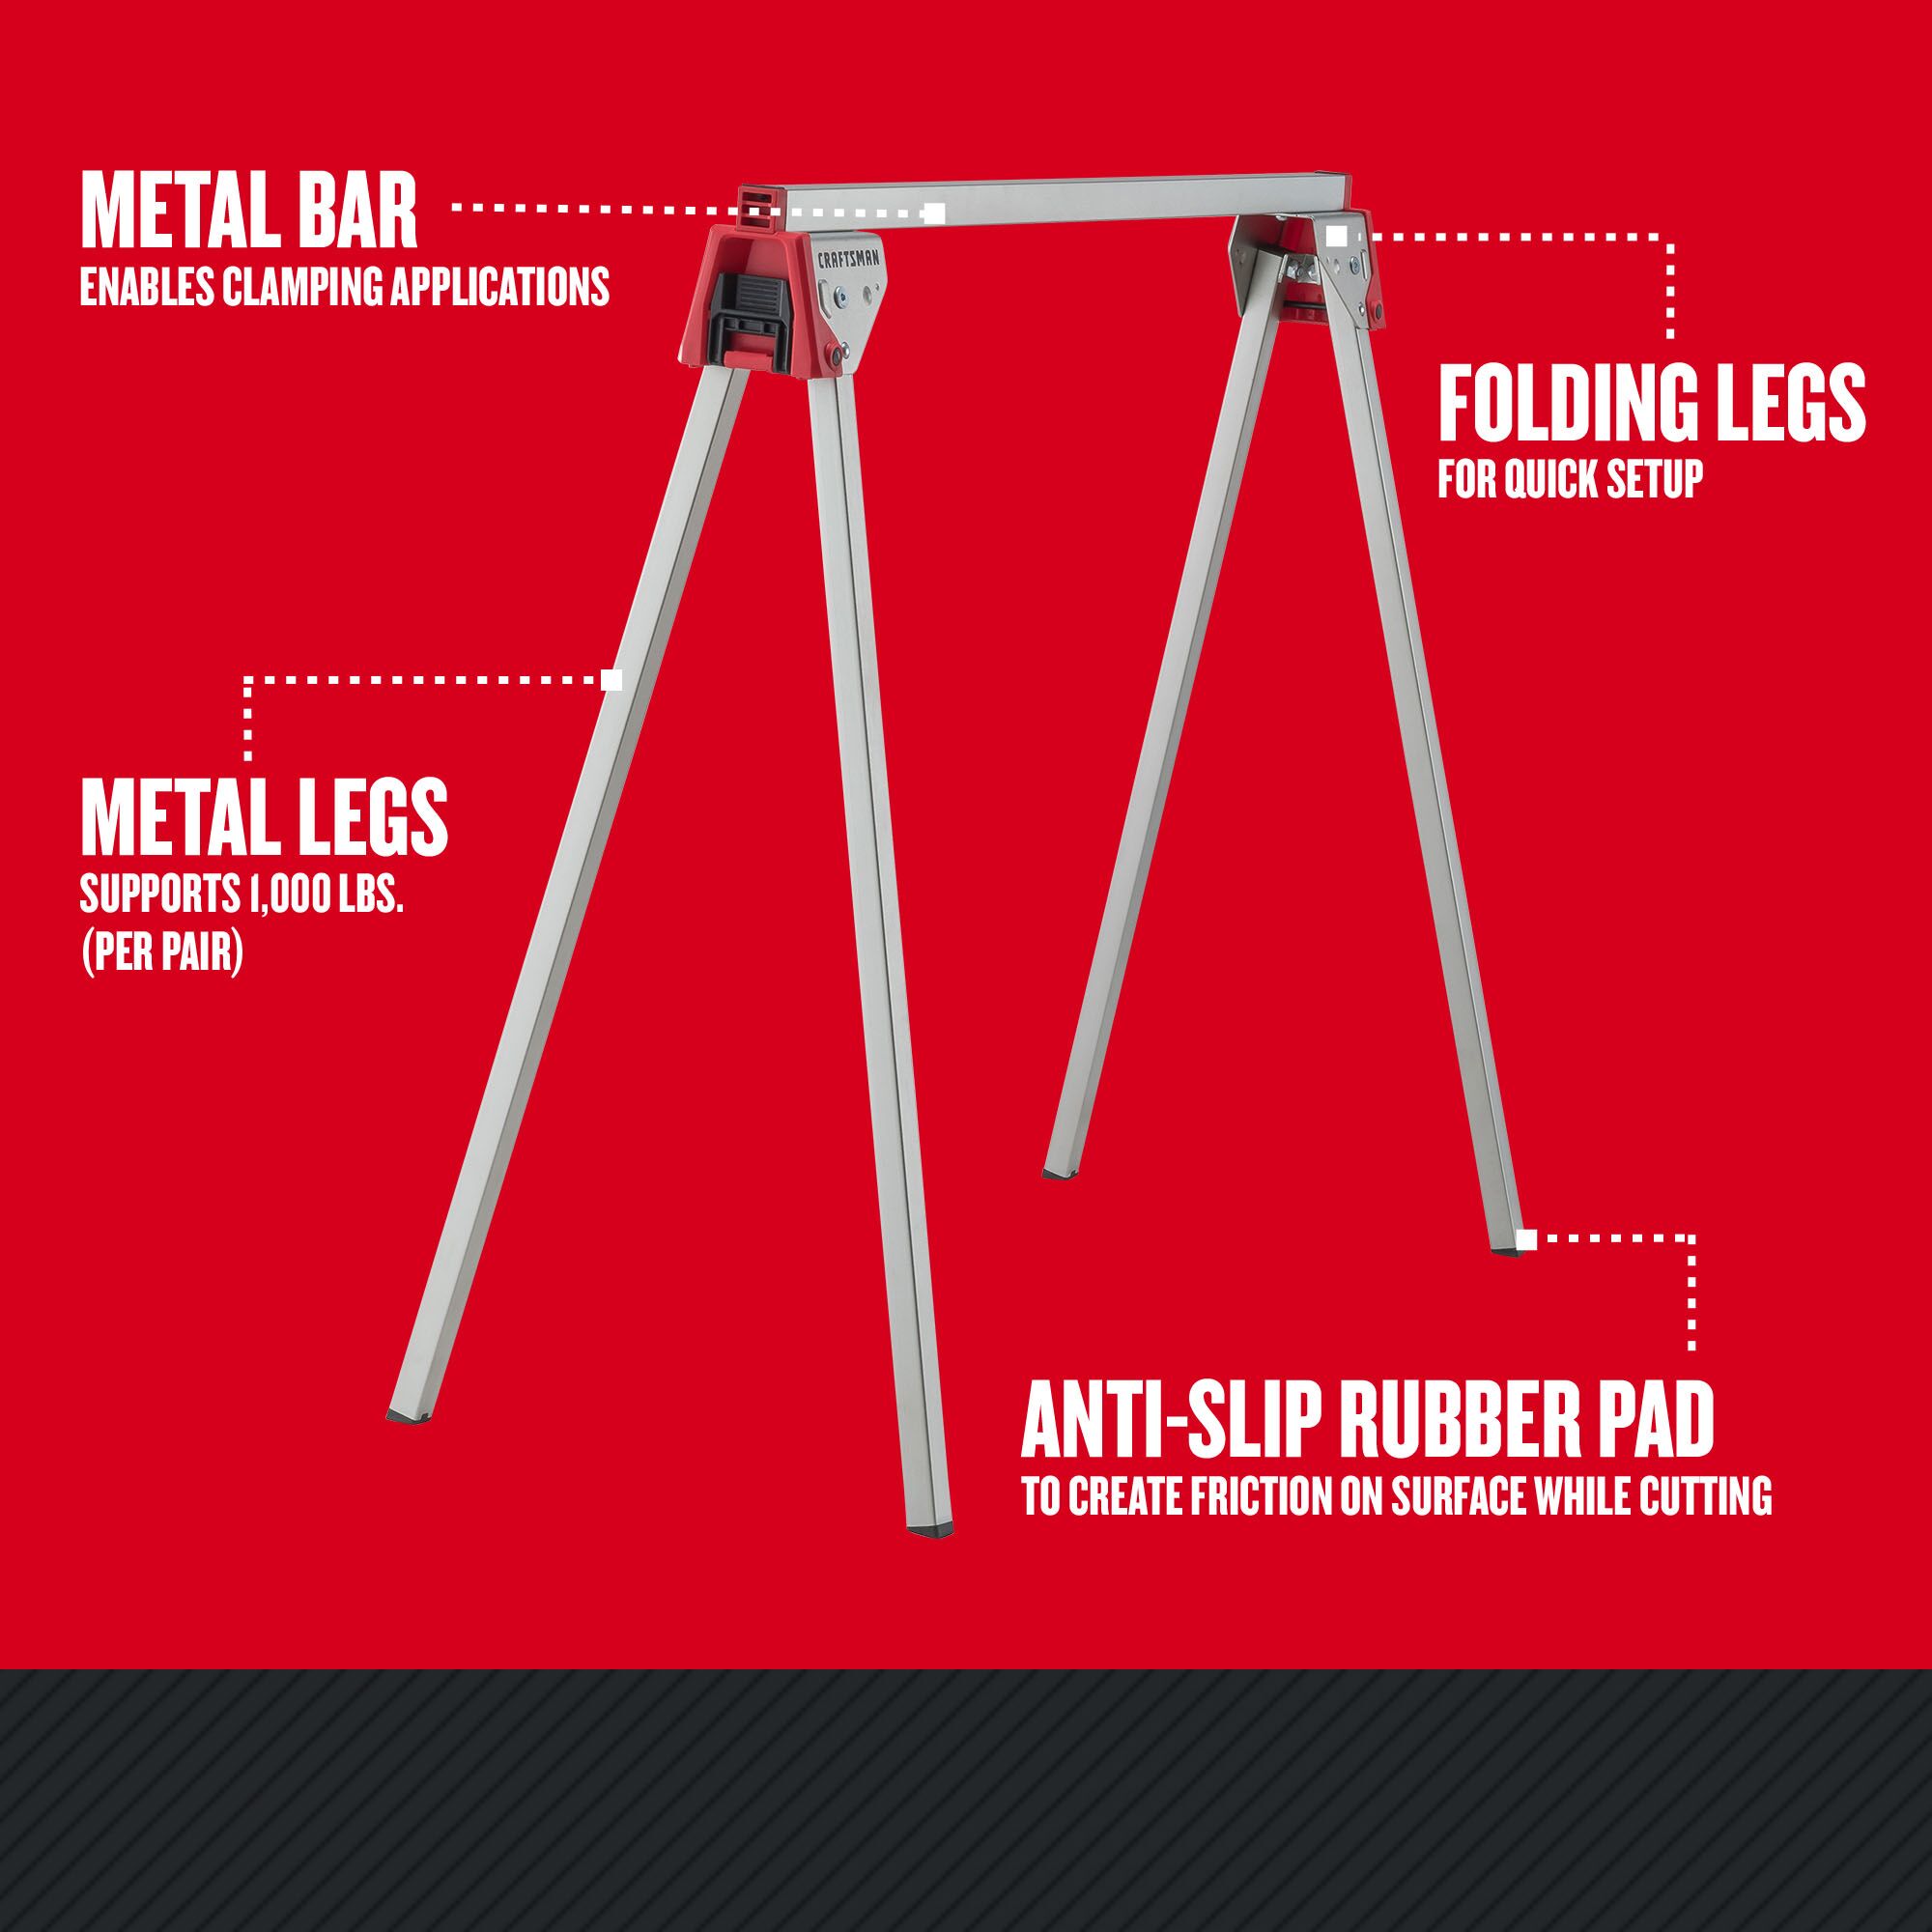 Graphic of CRAFTSMAN Bench & Stationary: Sawhorses highlighting product features